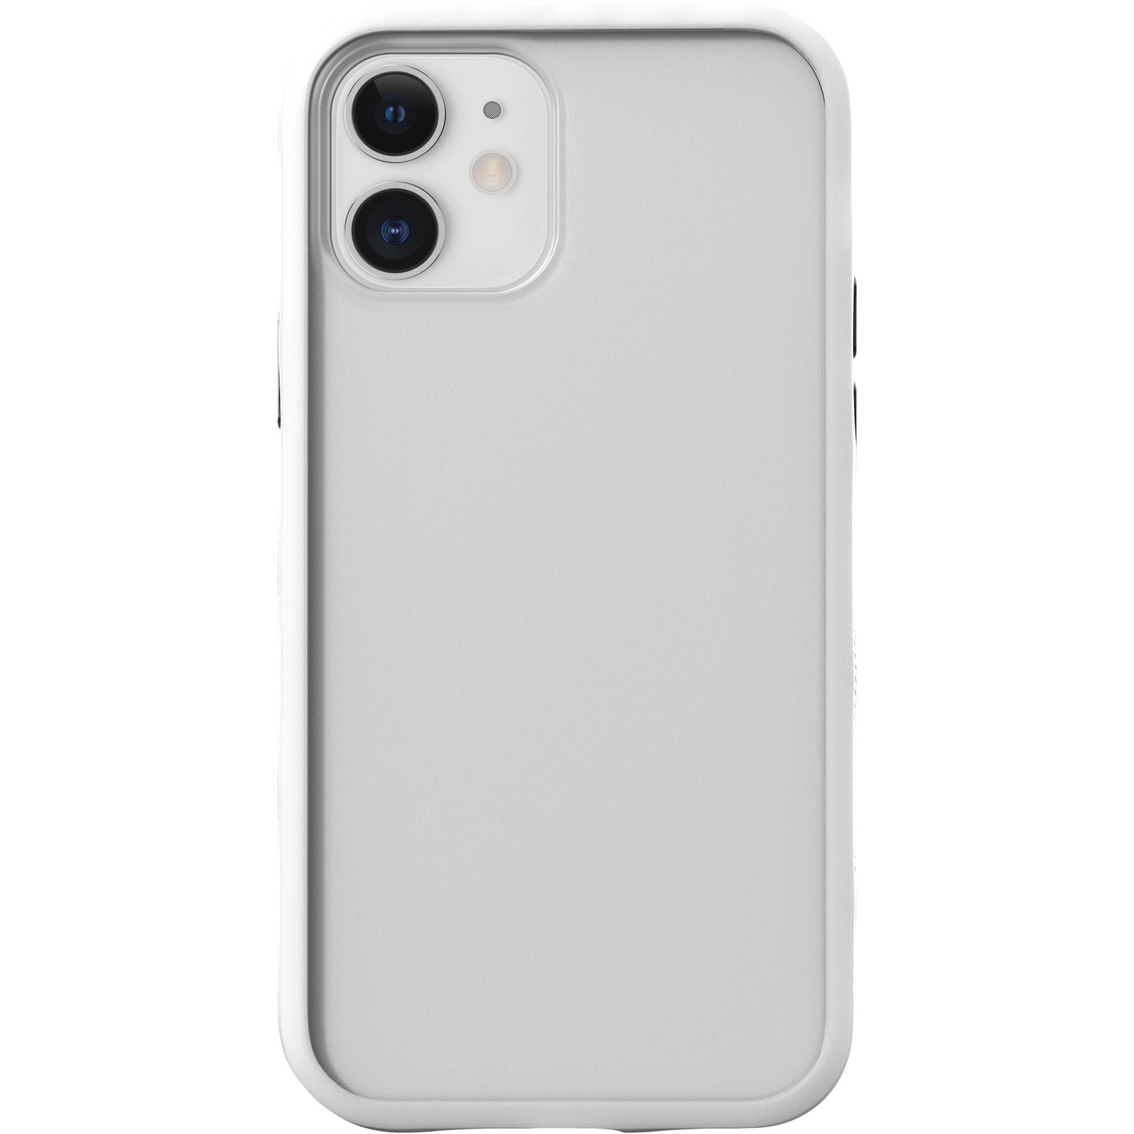 LAUT Design USA Crystal Matter IMPKT 2.0 Case for iPhone 12 Mini - Image 3 of 6